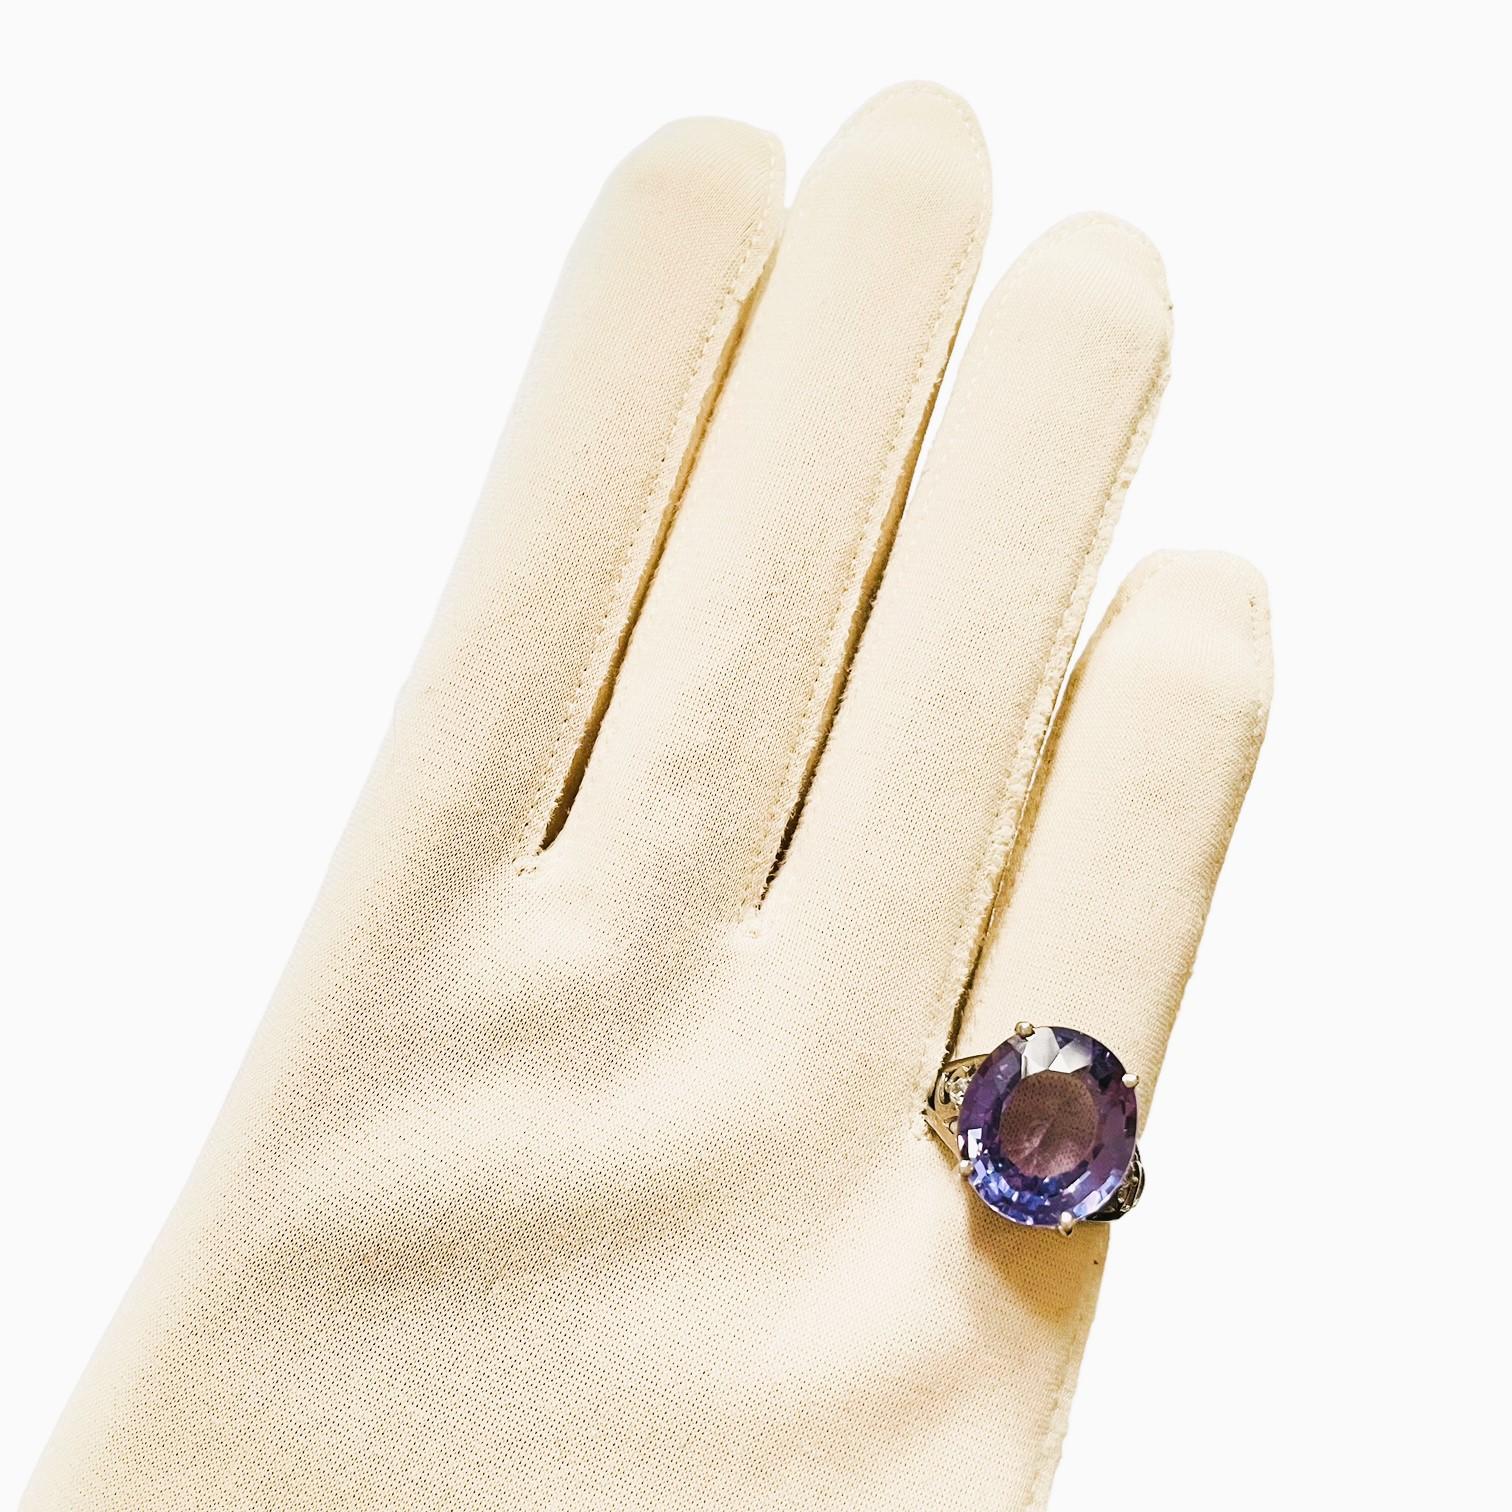 New Free of Inclusions African Blue Purple Spinel & Sapphire Sterling Ring 5.75 2